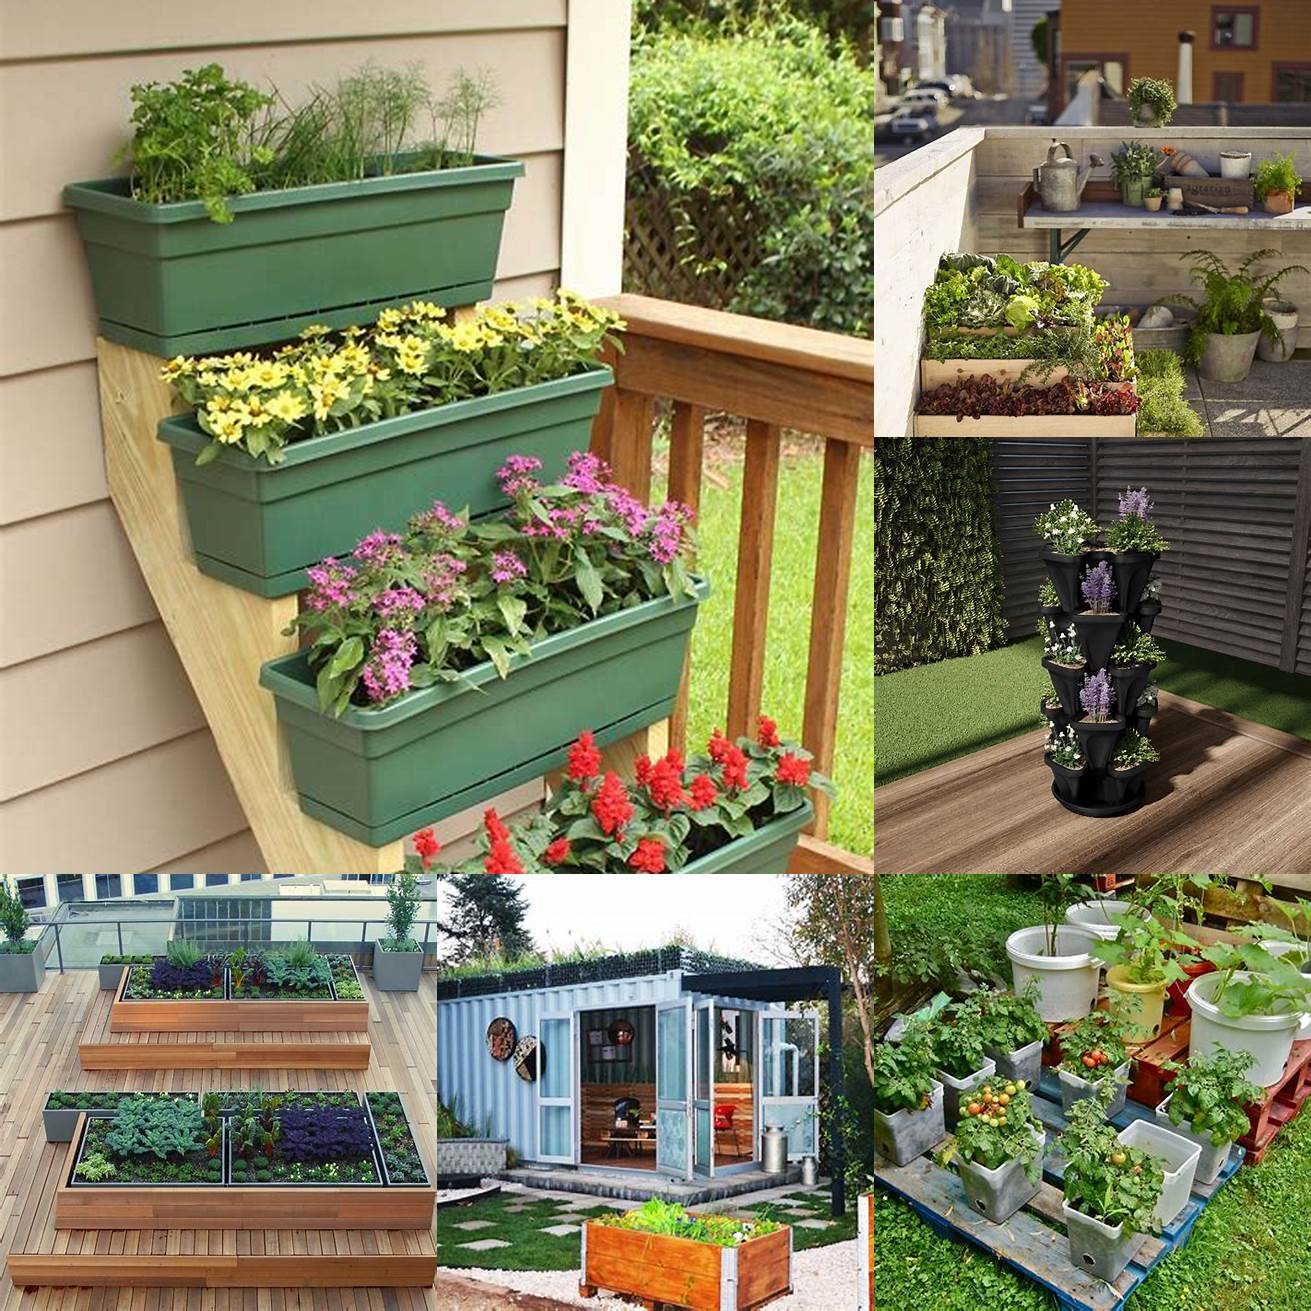 1 Space-saving Rooftop containers allow you to make use of space that would otherwise go unused You can use your rooftop to grow plants or vegetables or even as a storage space for outdoor equipment